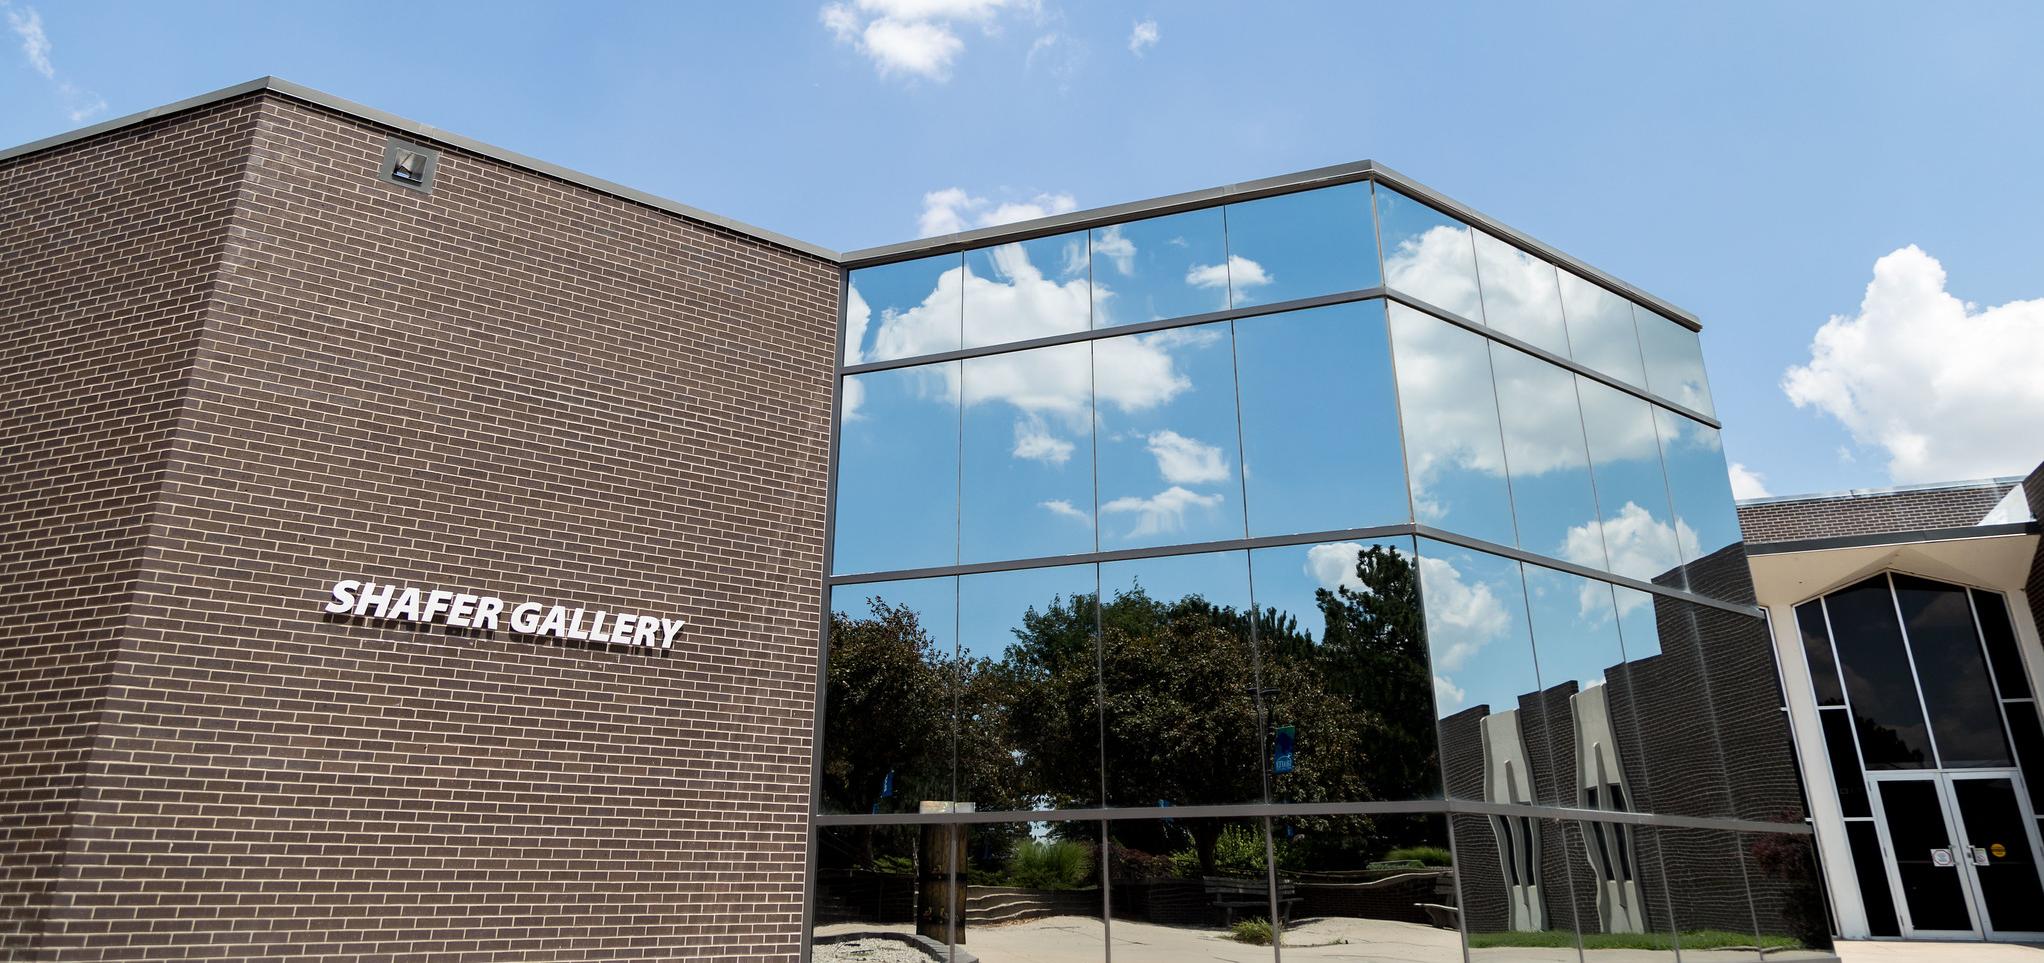 Entrance to the shafer gallery